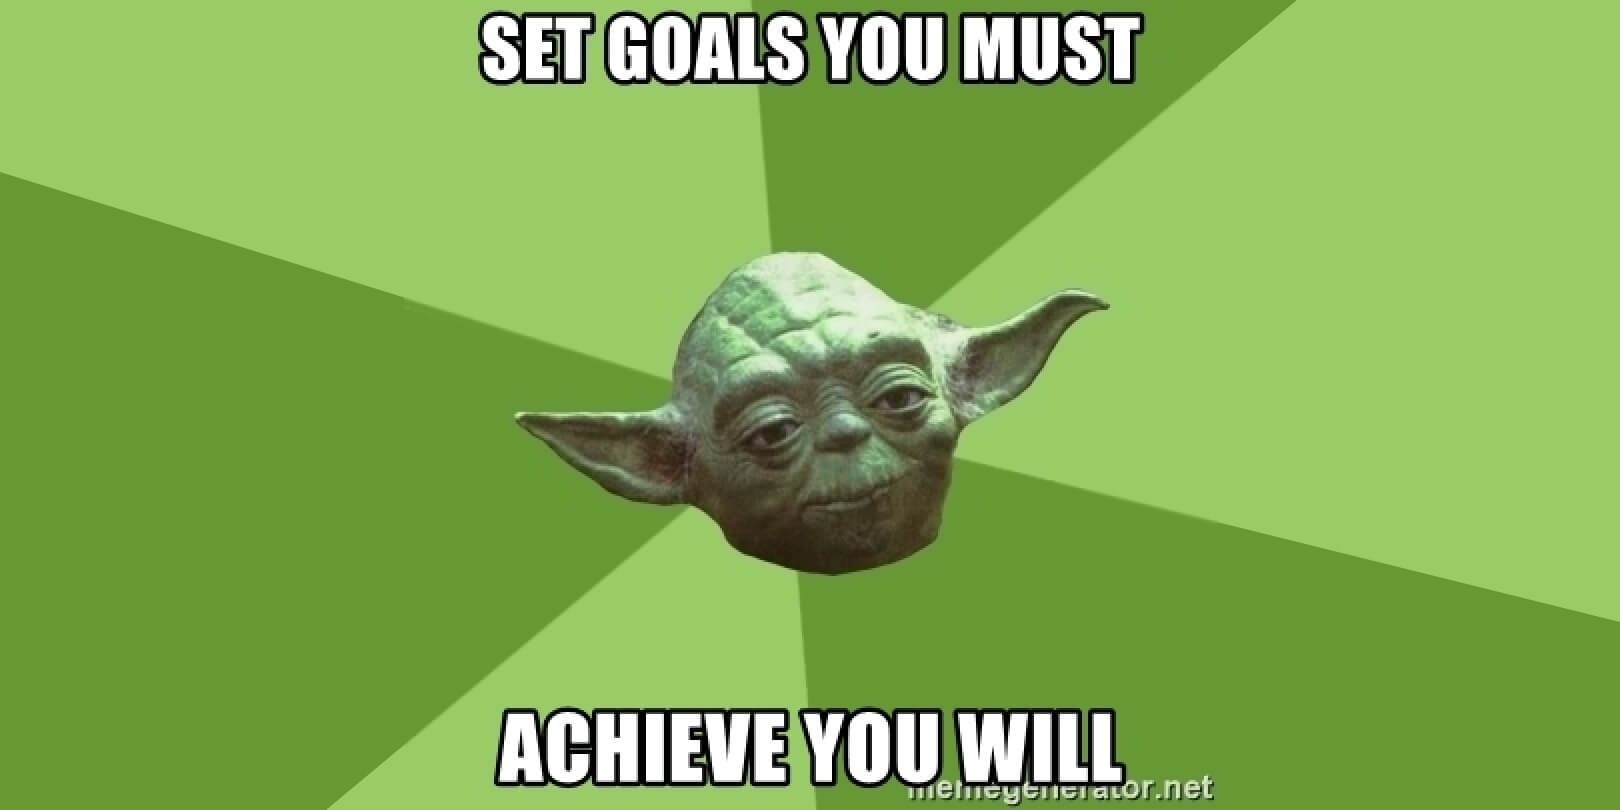 Set Goals and Evaluate Performance